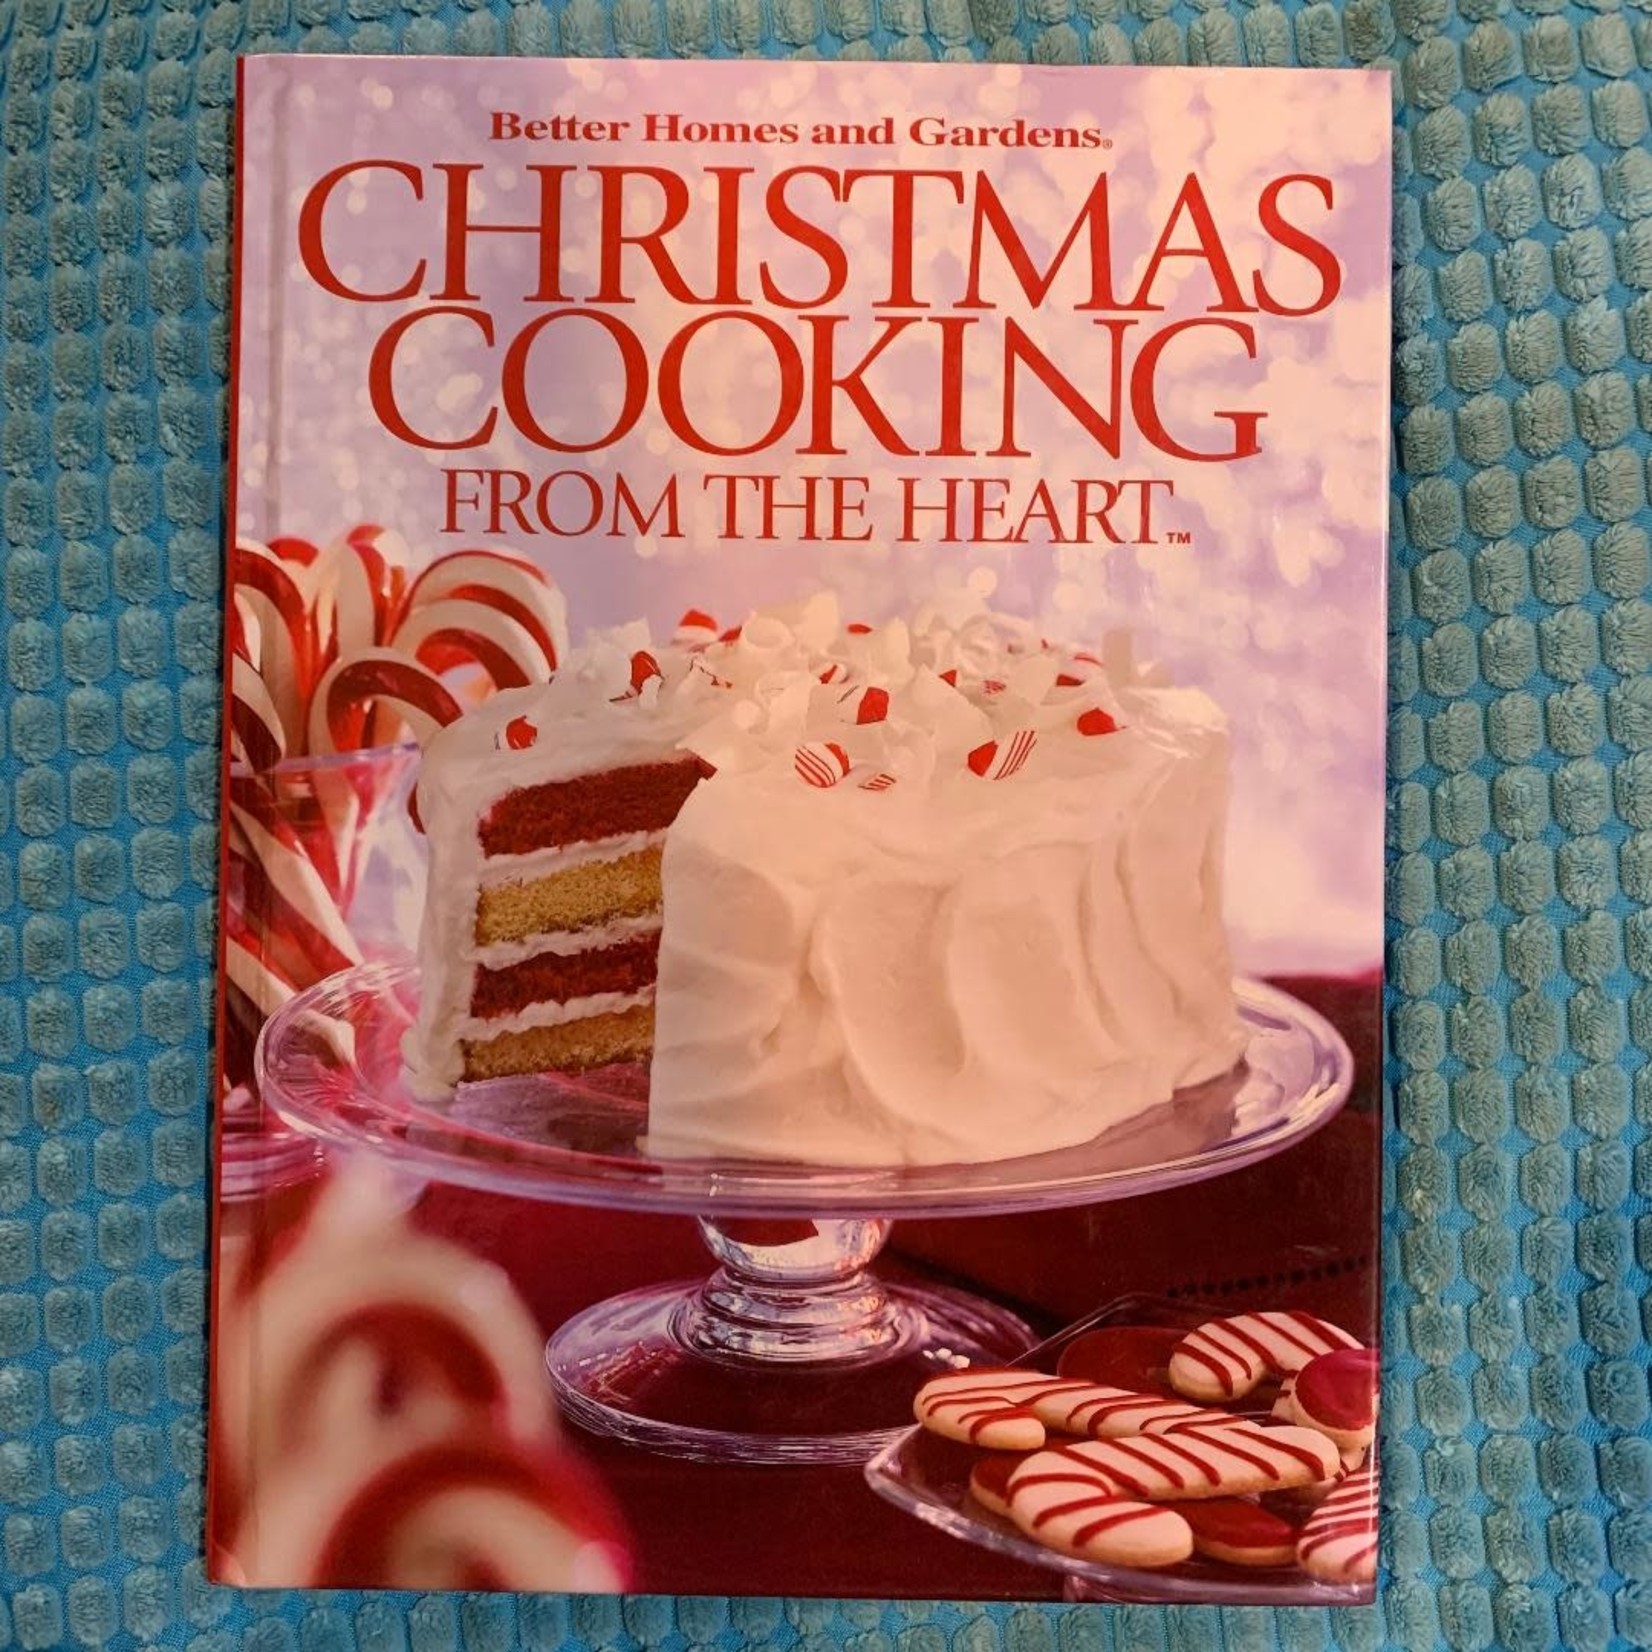 Christmas Cooking - From the Heart